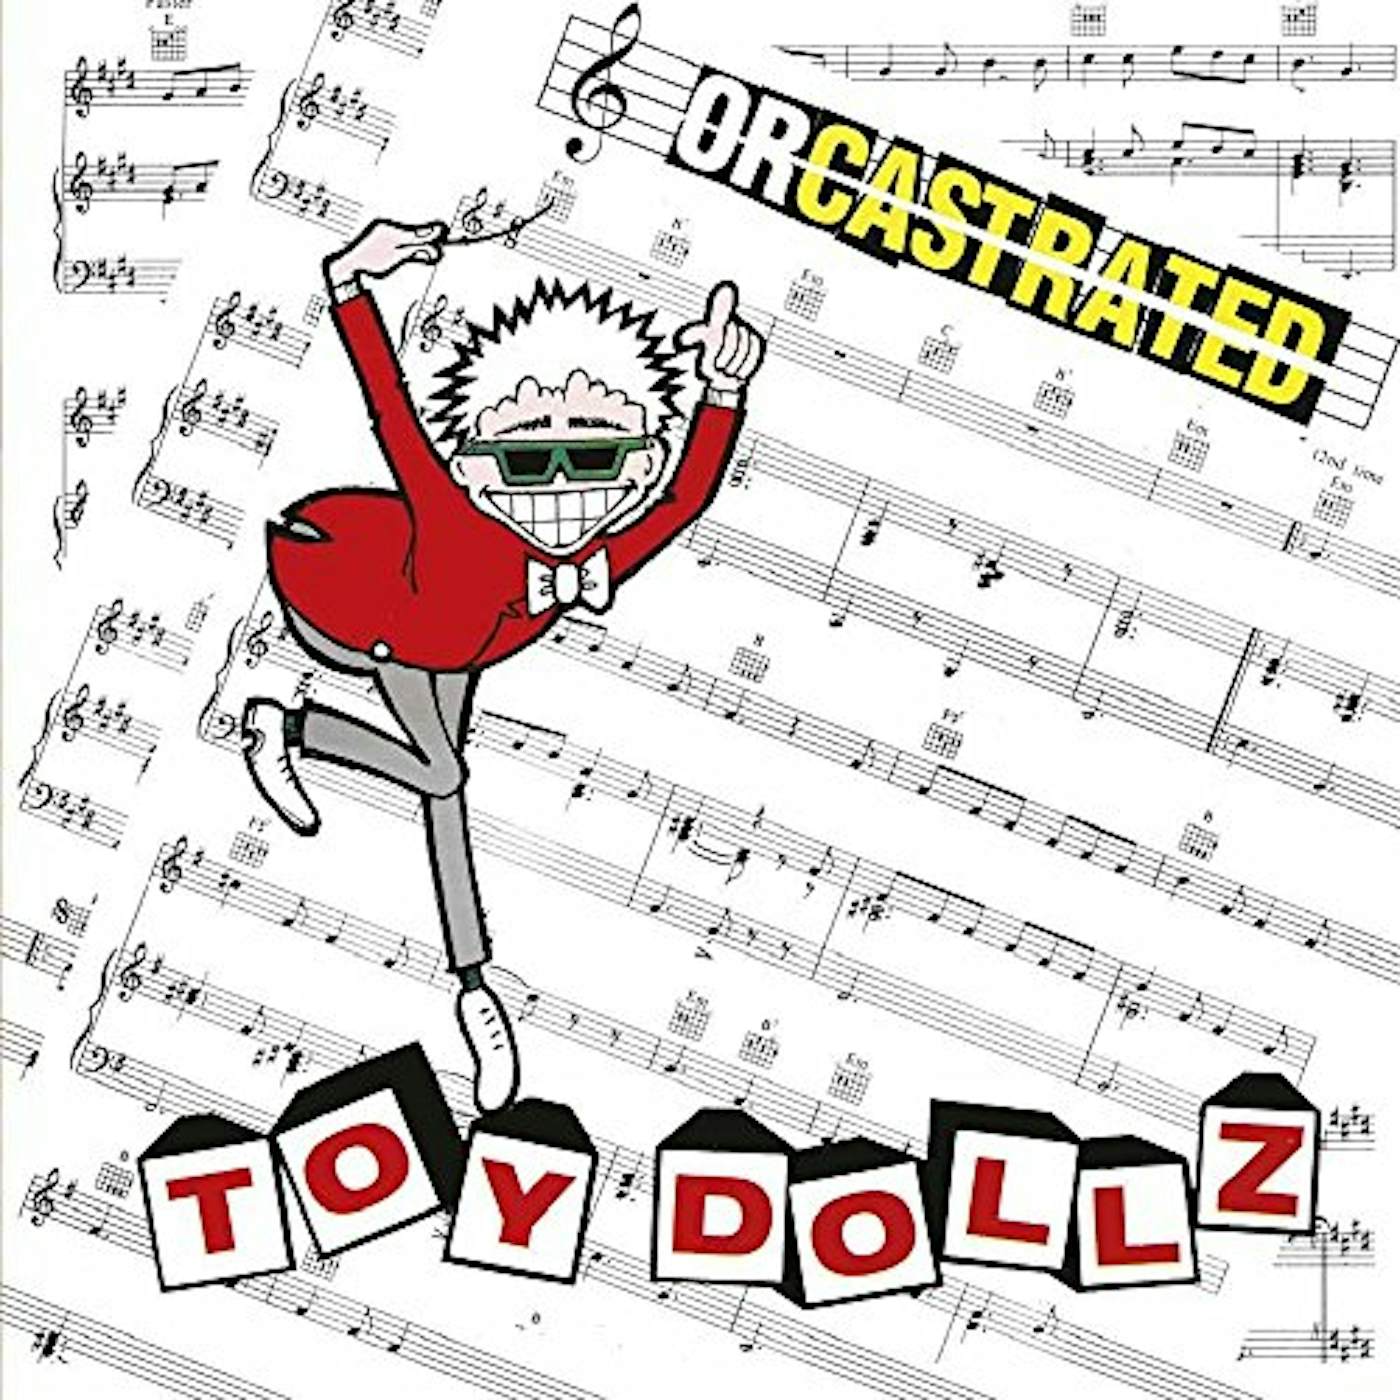 The Toy Dolls Orcastrated Vinyl Record